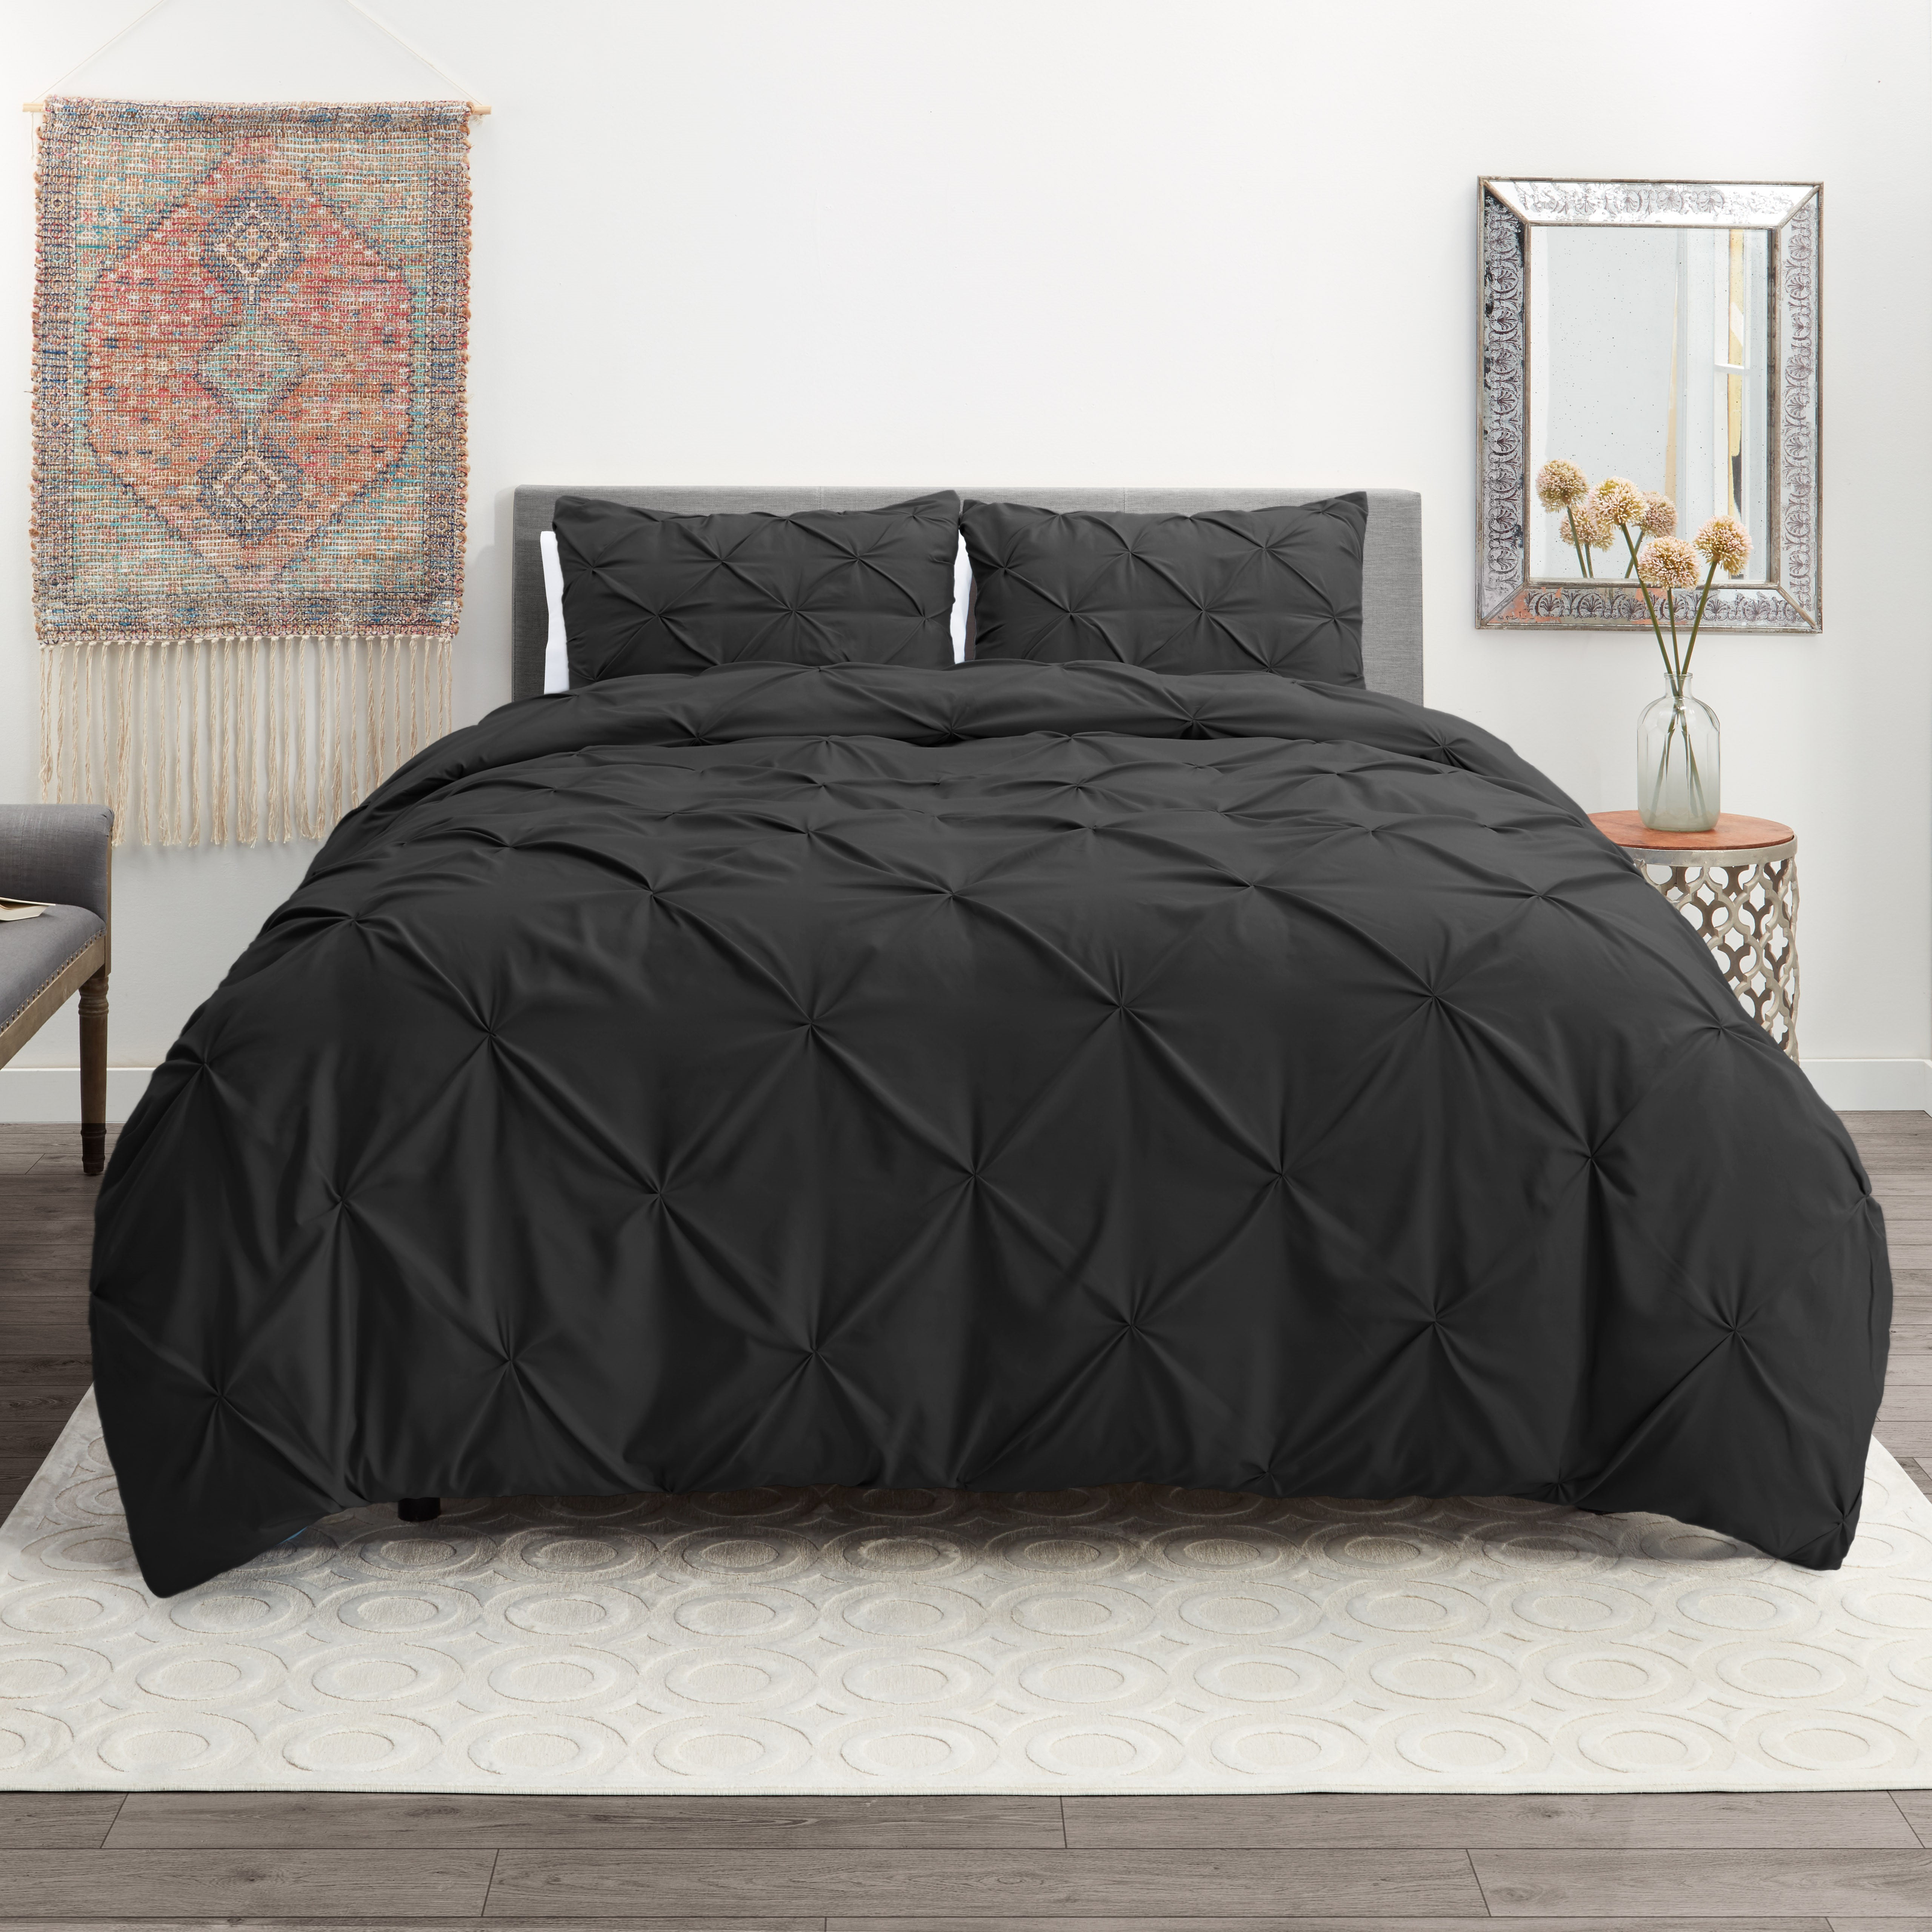 Nestl 2 Piece Pinch Pleated Duvet Cover, How To Use Duvet Cover With Ties